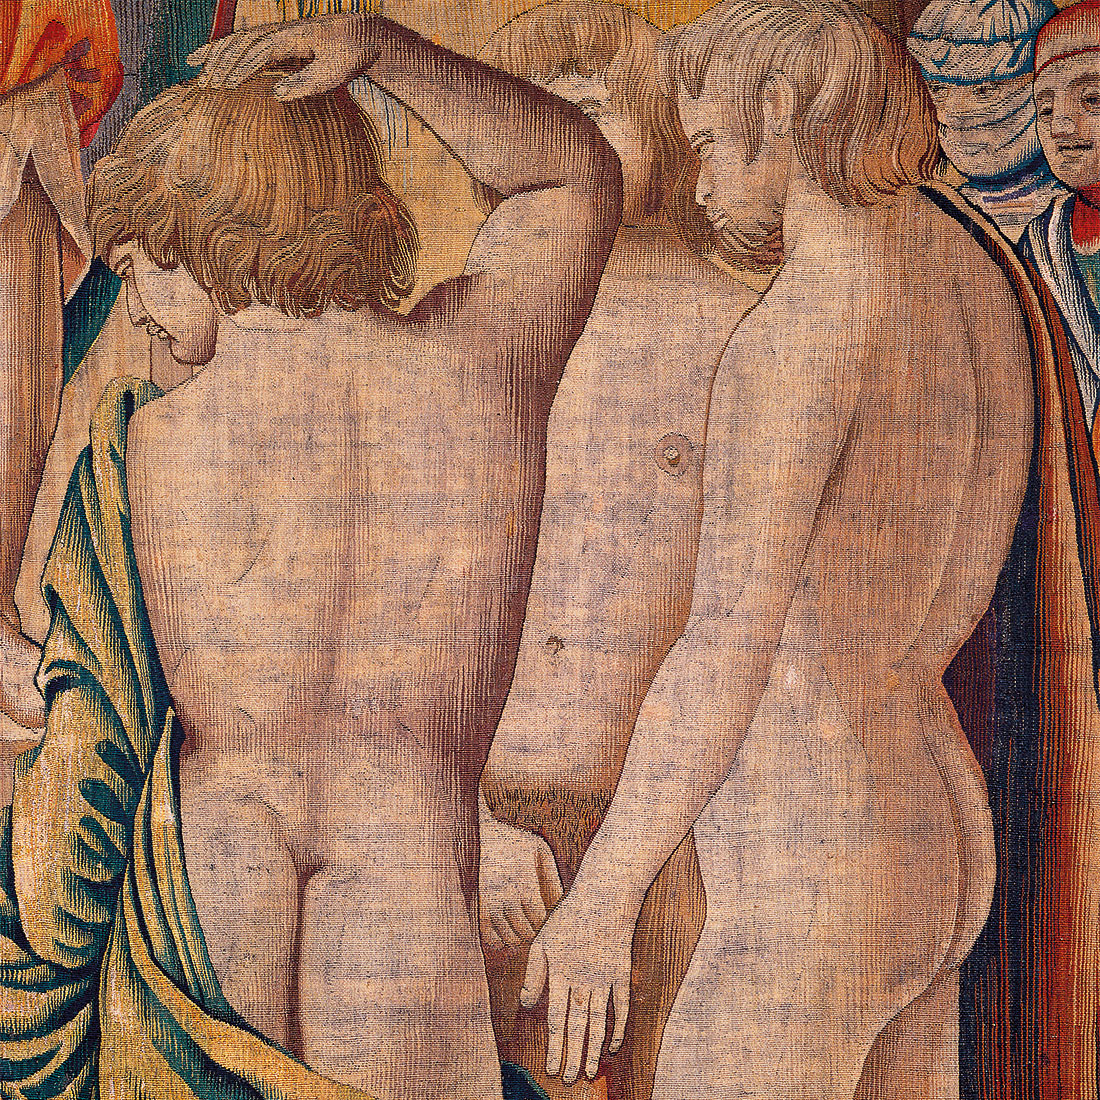 Boys just want to have fun: February scene from the Trivulzio tapestry, by Benedetto da Milano, after a design by Bramantino, Milan, 1504-9. 